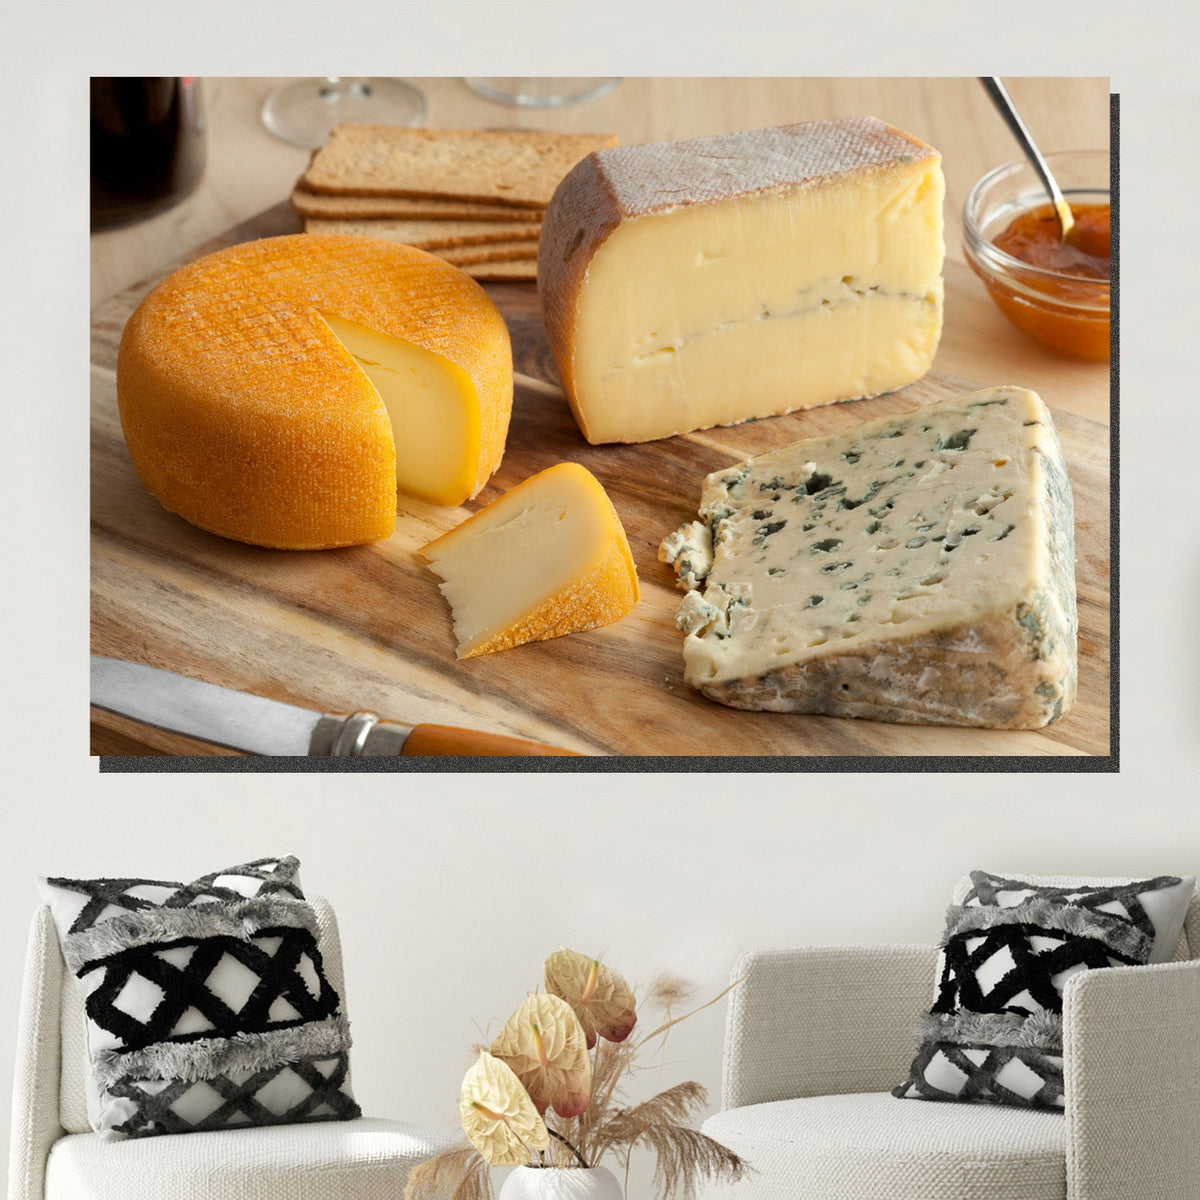 https://cdn.shopify.com/s/files/1/0387/9986/8044/products/FrenchCheesePlatterCanvasArtprintStretched-2.jpg